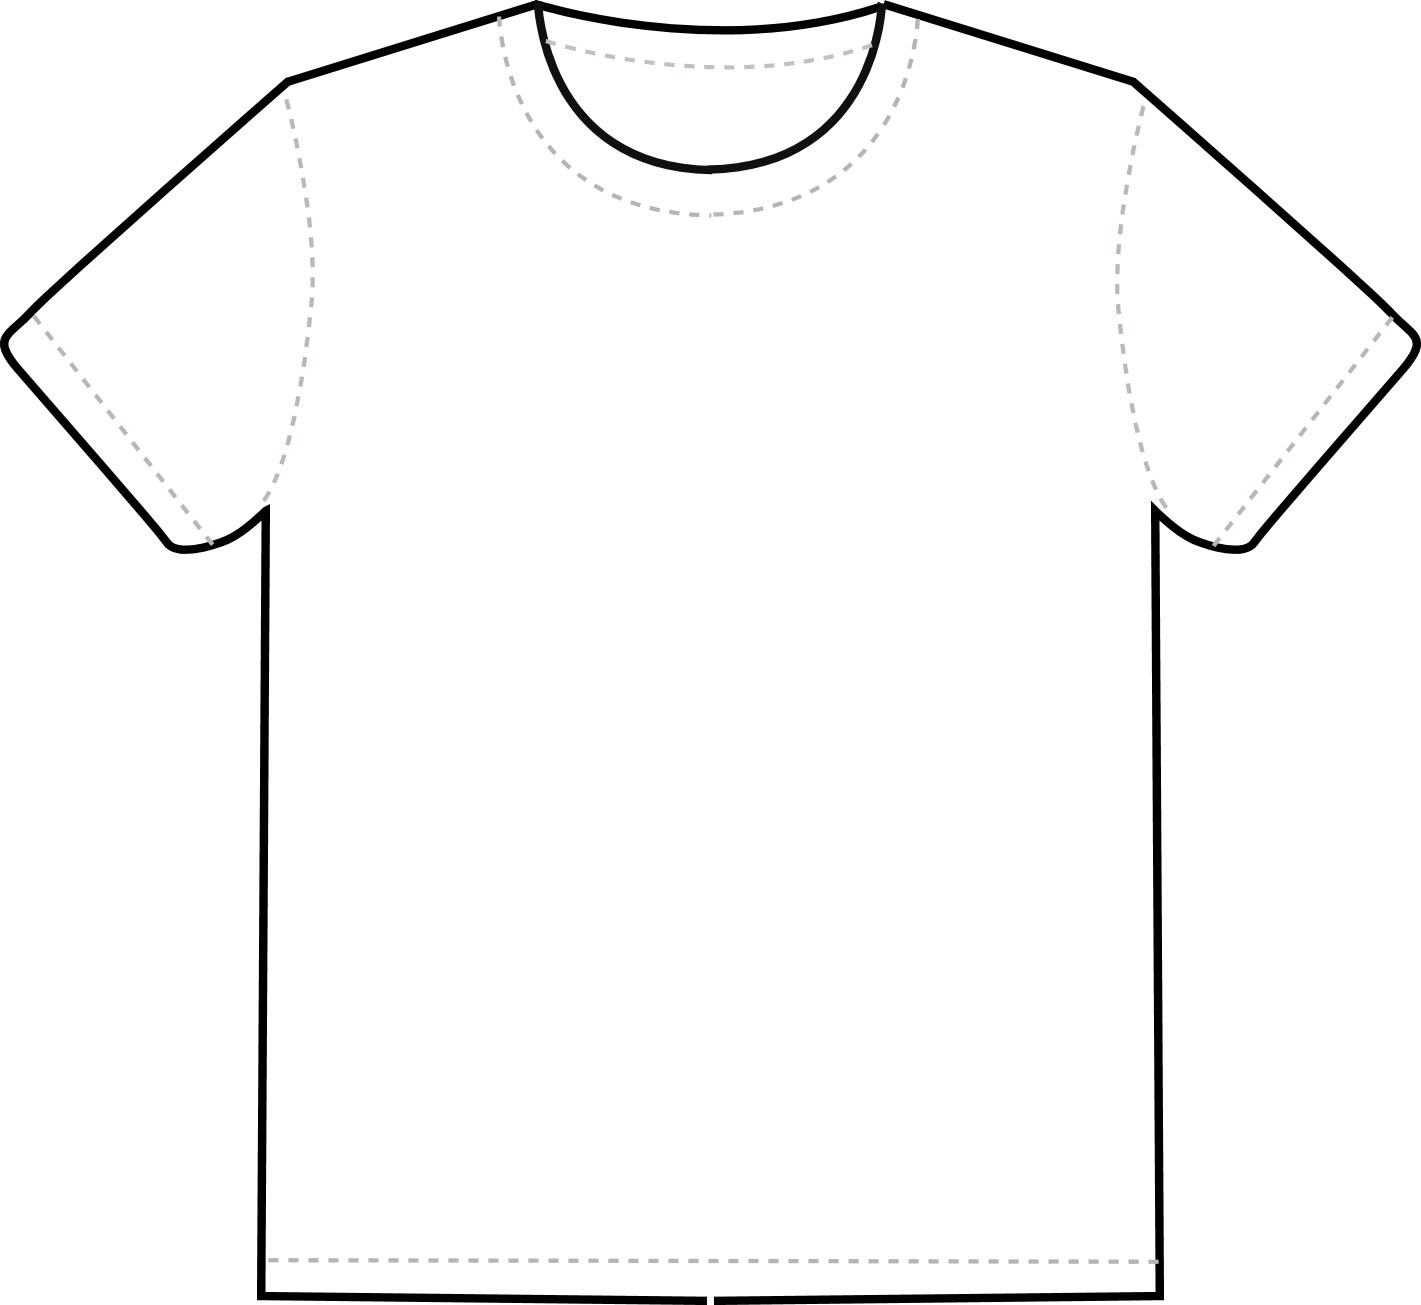 tshirt-cake-template-clipart-best